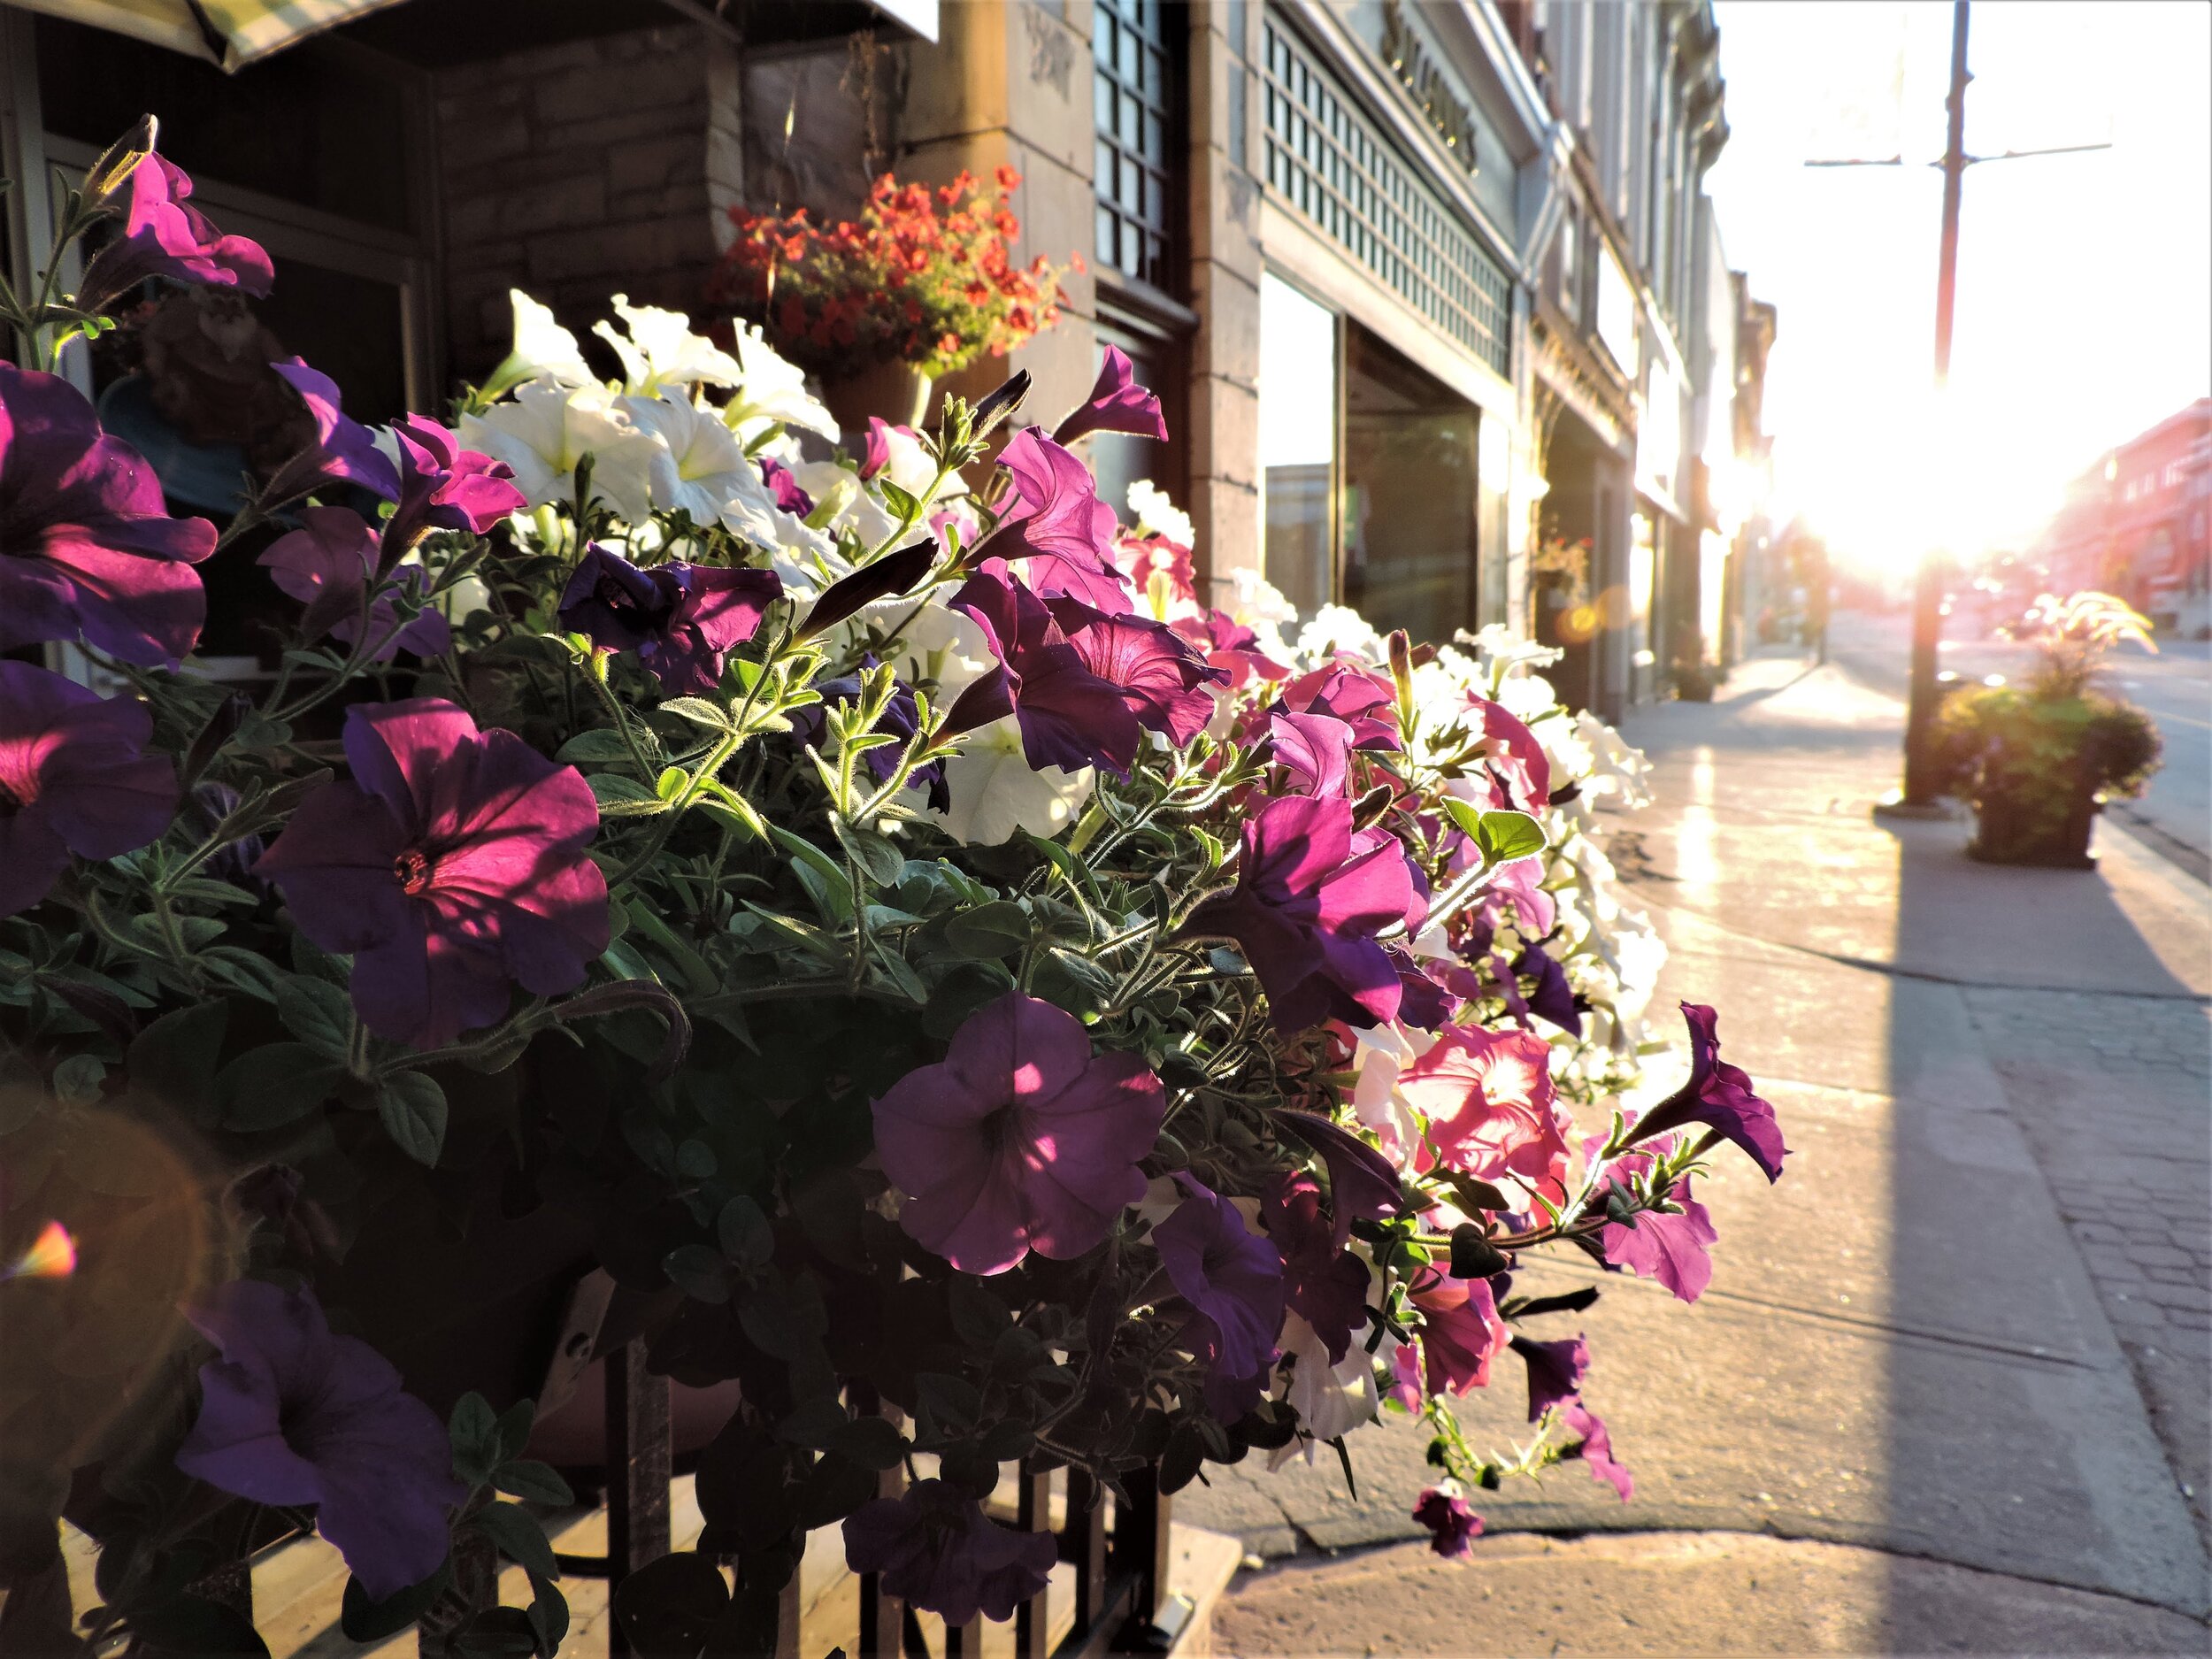 Taken on Nikon DSLR. The streets of Pembroke, ON were completely vacant on a Saturday morning at 6:50AM. The sun shone just brightly enough to illuminate the flowers sitting on the front of Kerry’s restaurant.